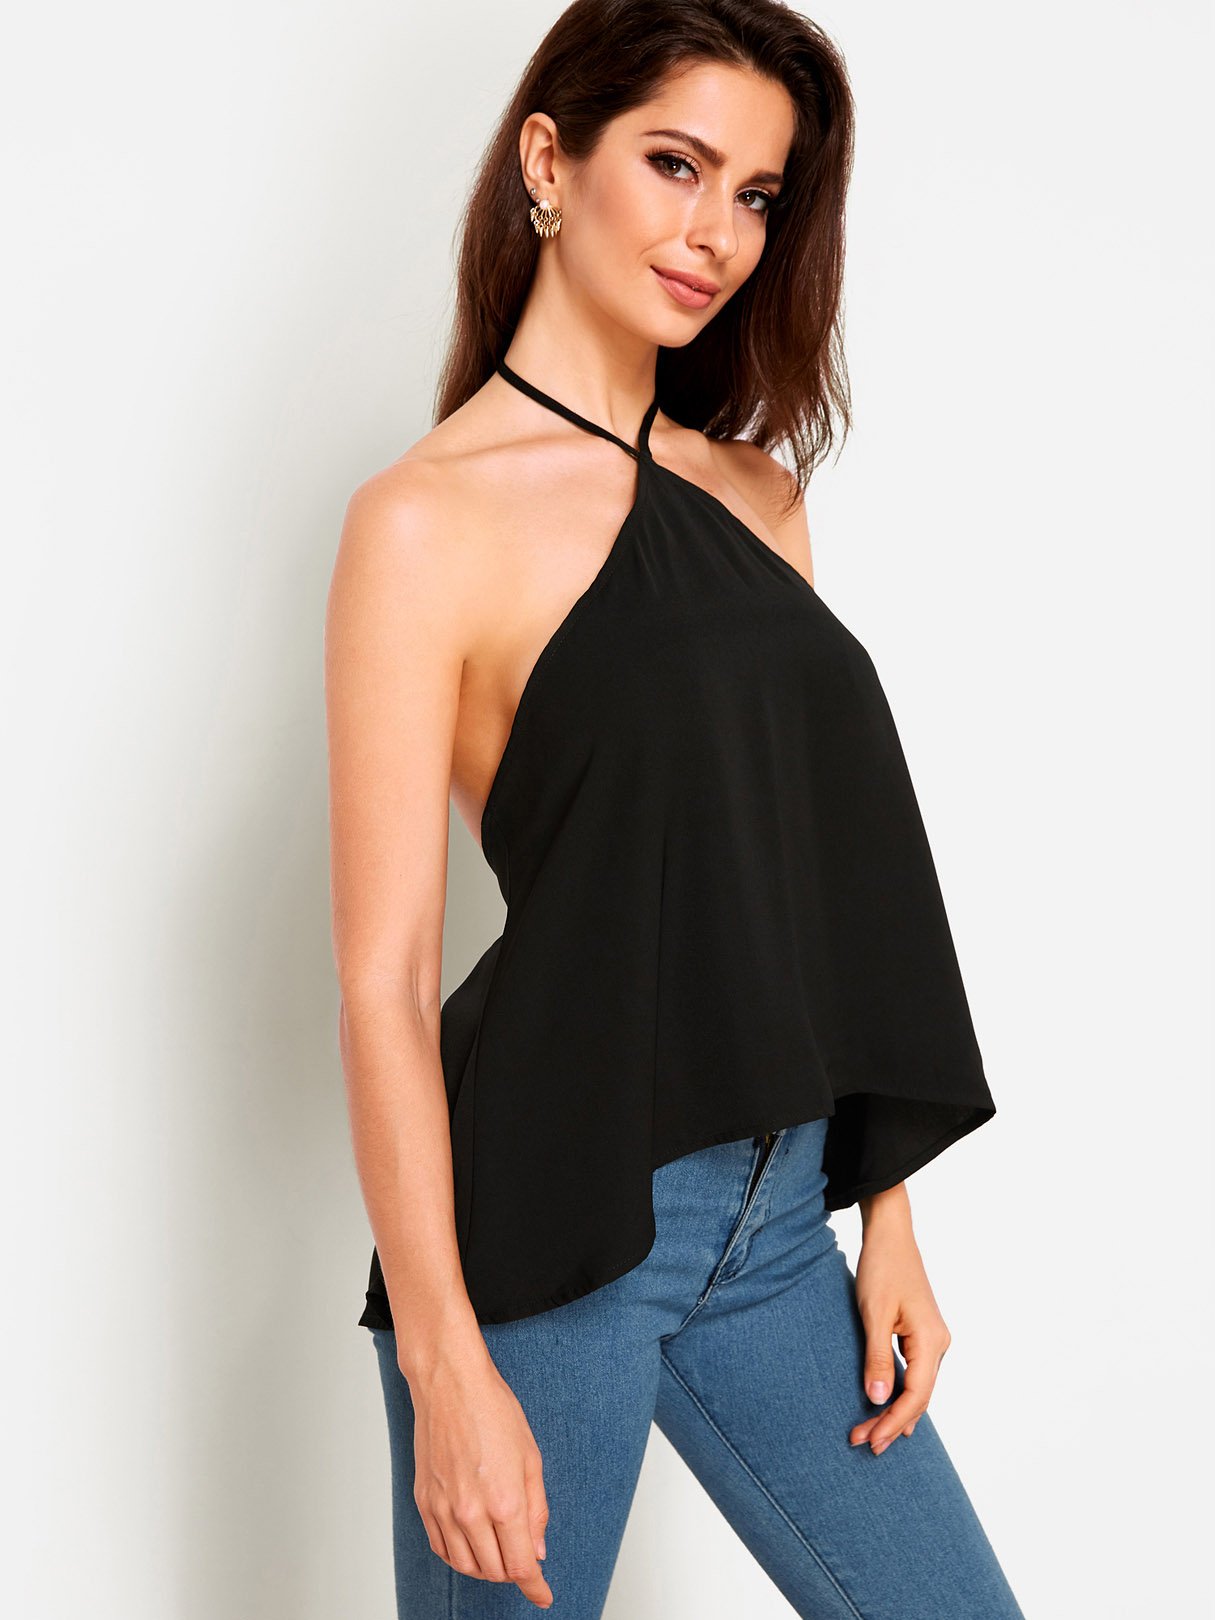 Backless Camis